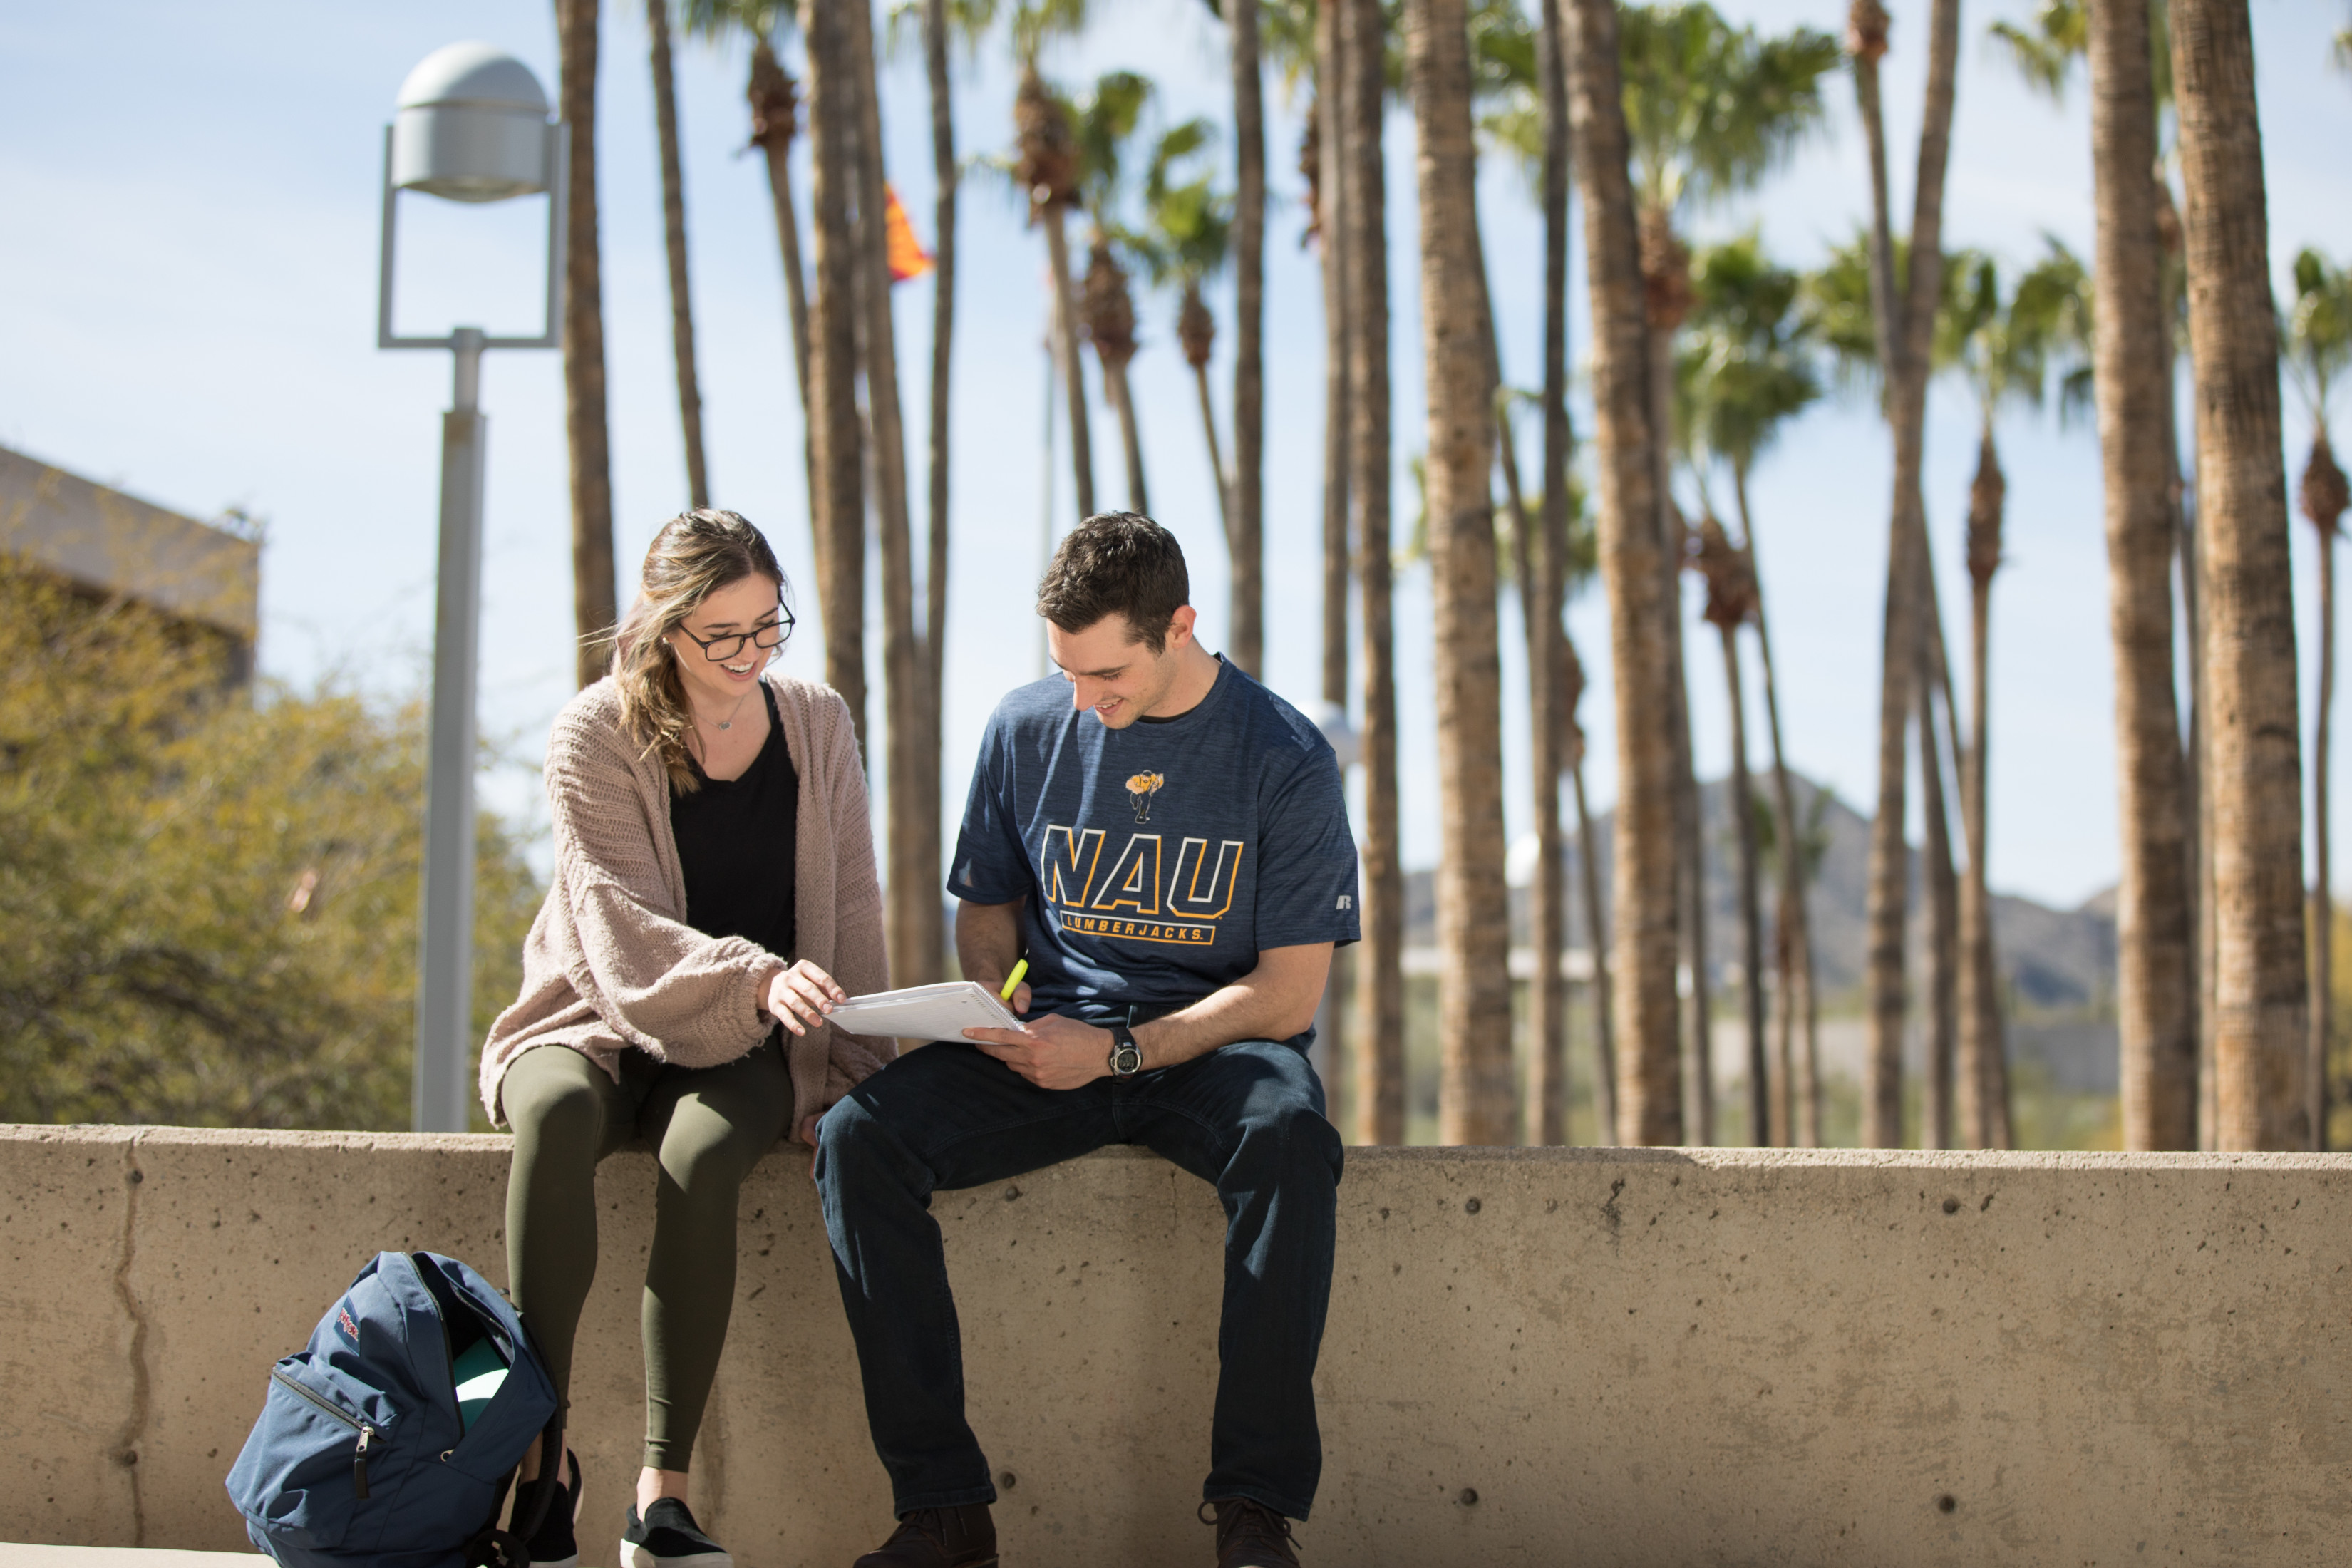 Students sitting outside campus with palm trees in the background.